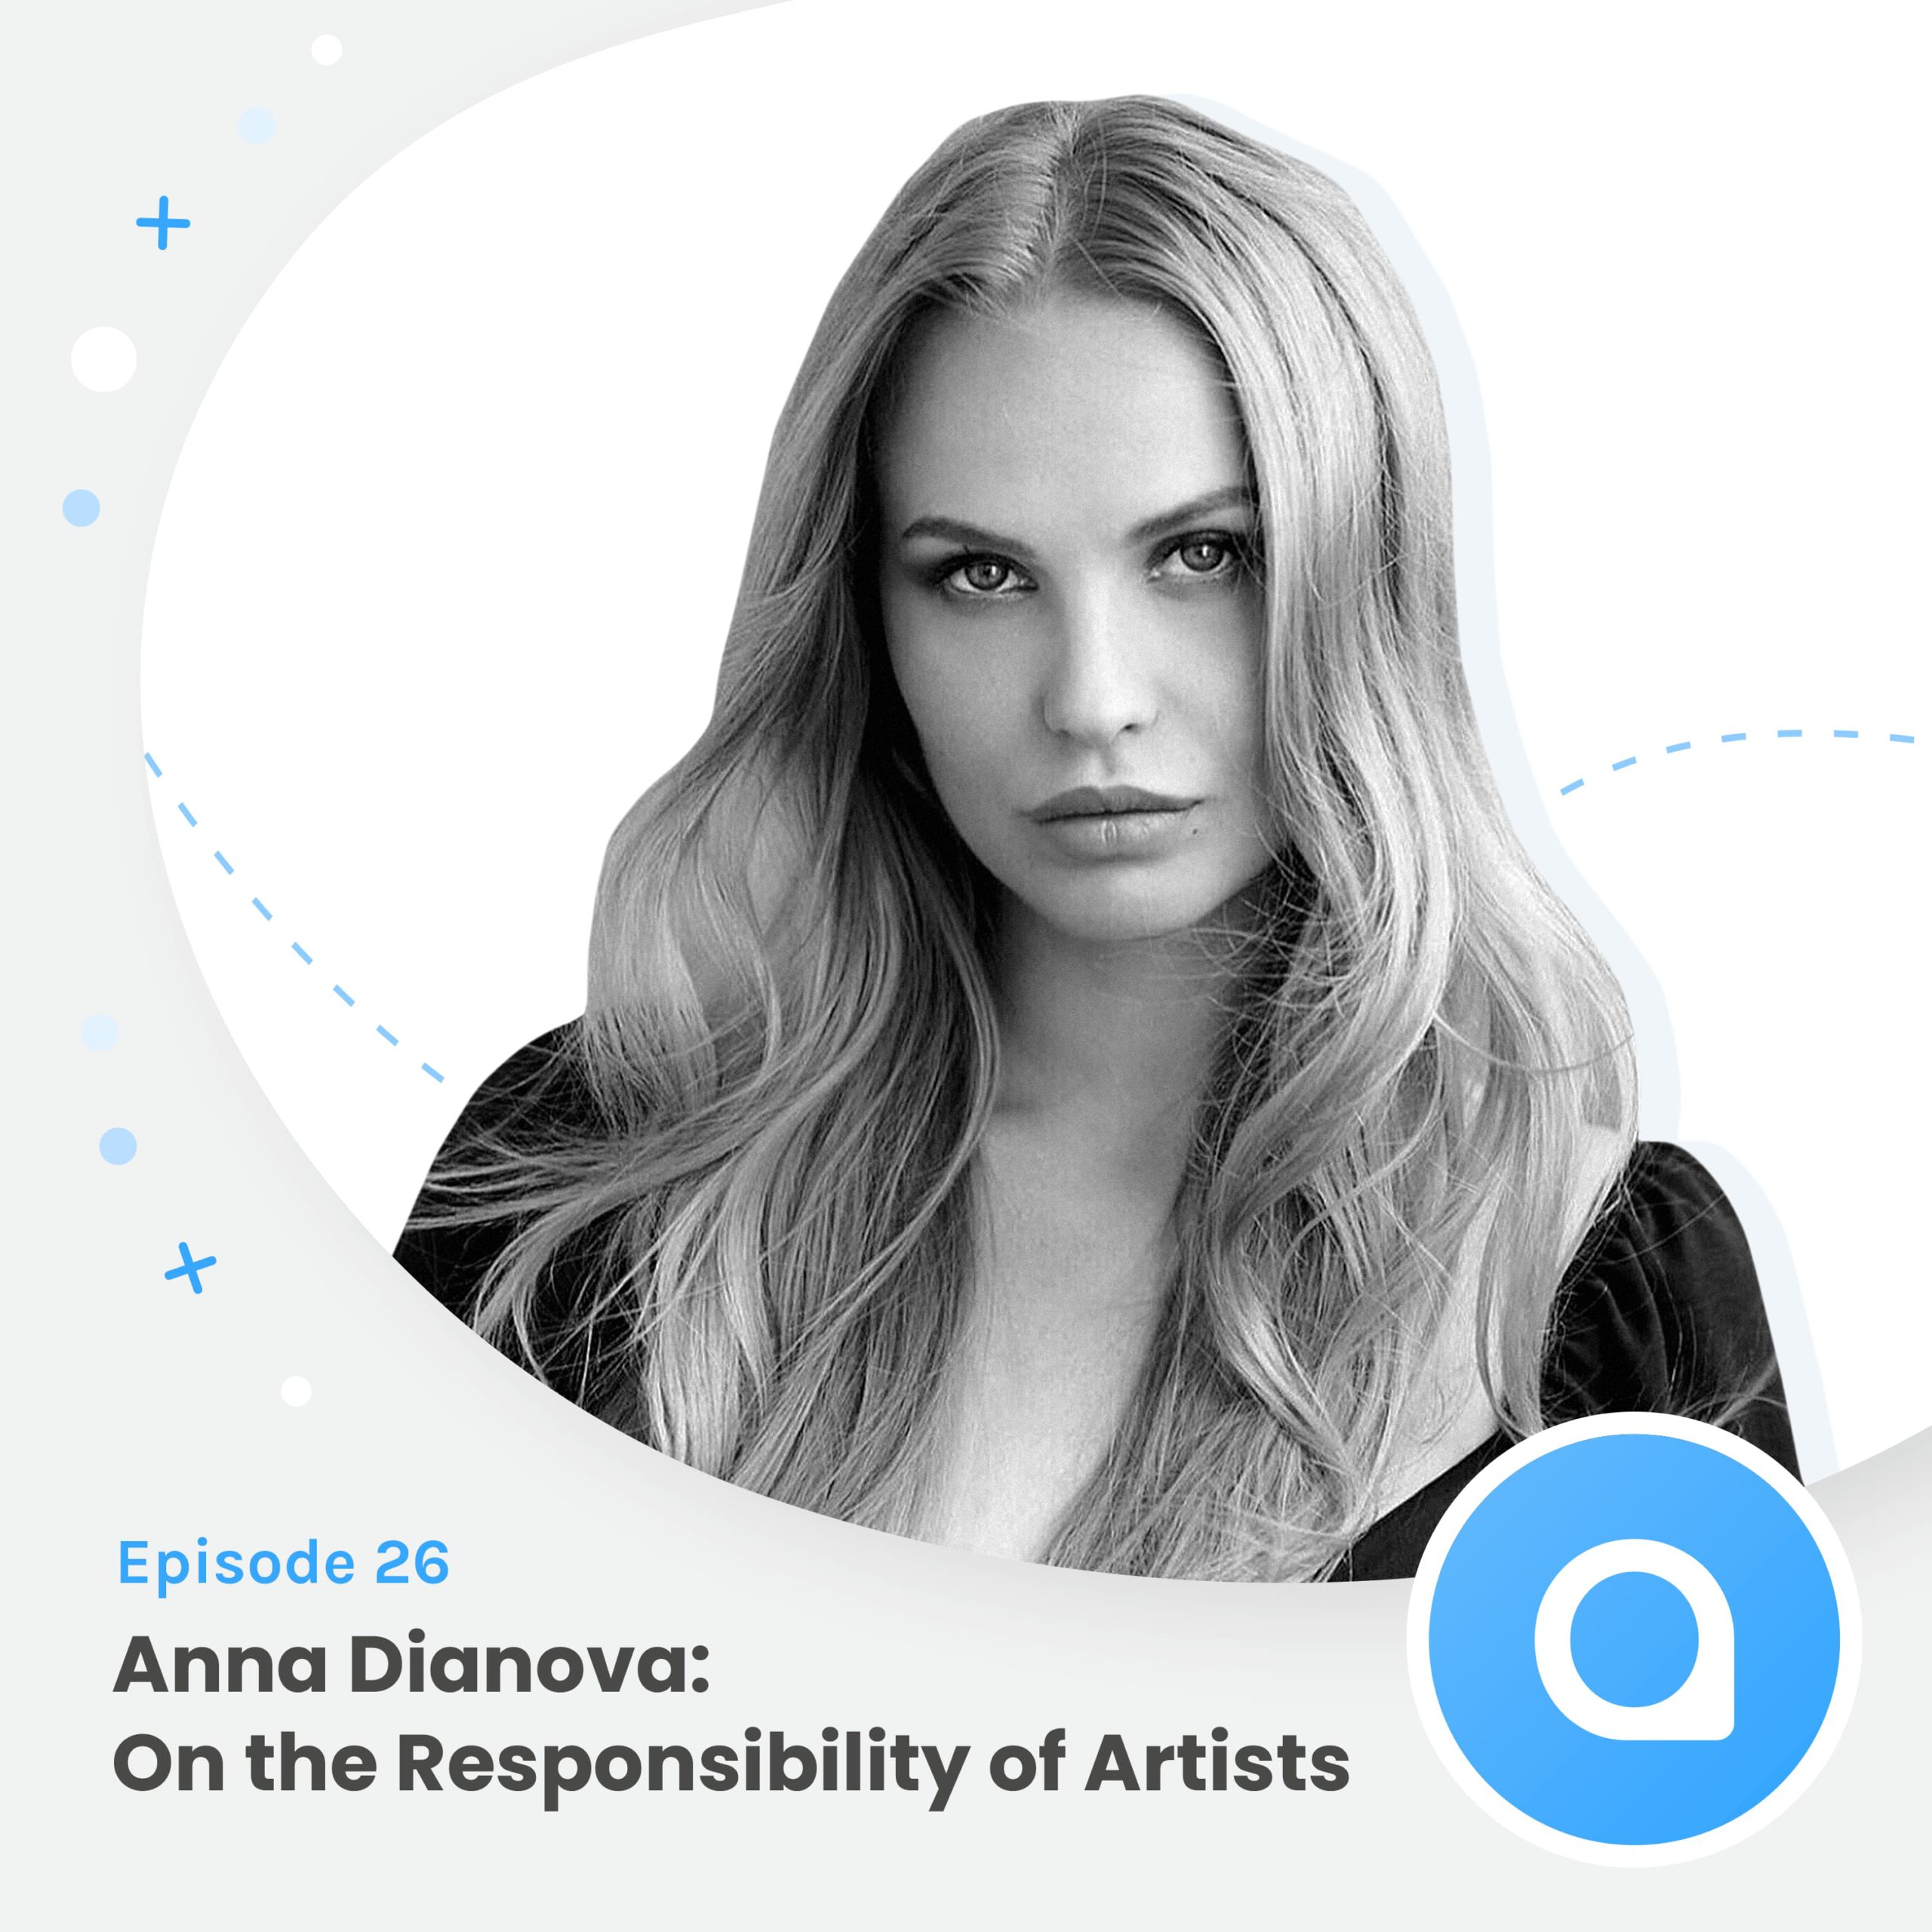 Anna Dianova: On the Responsibility of Artists